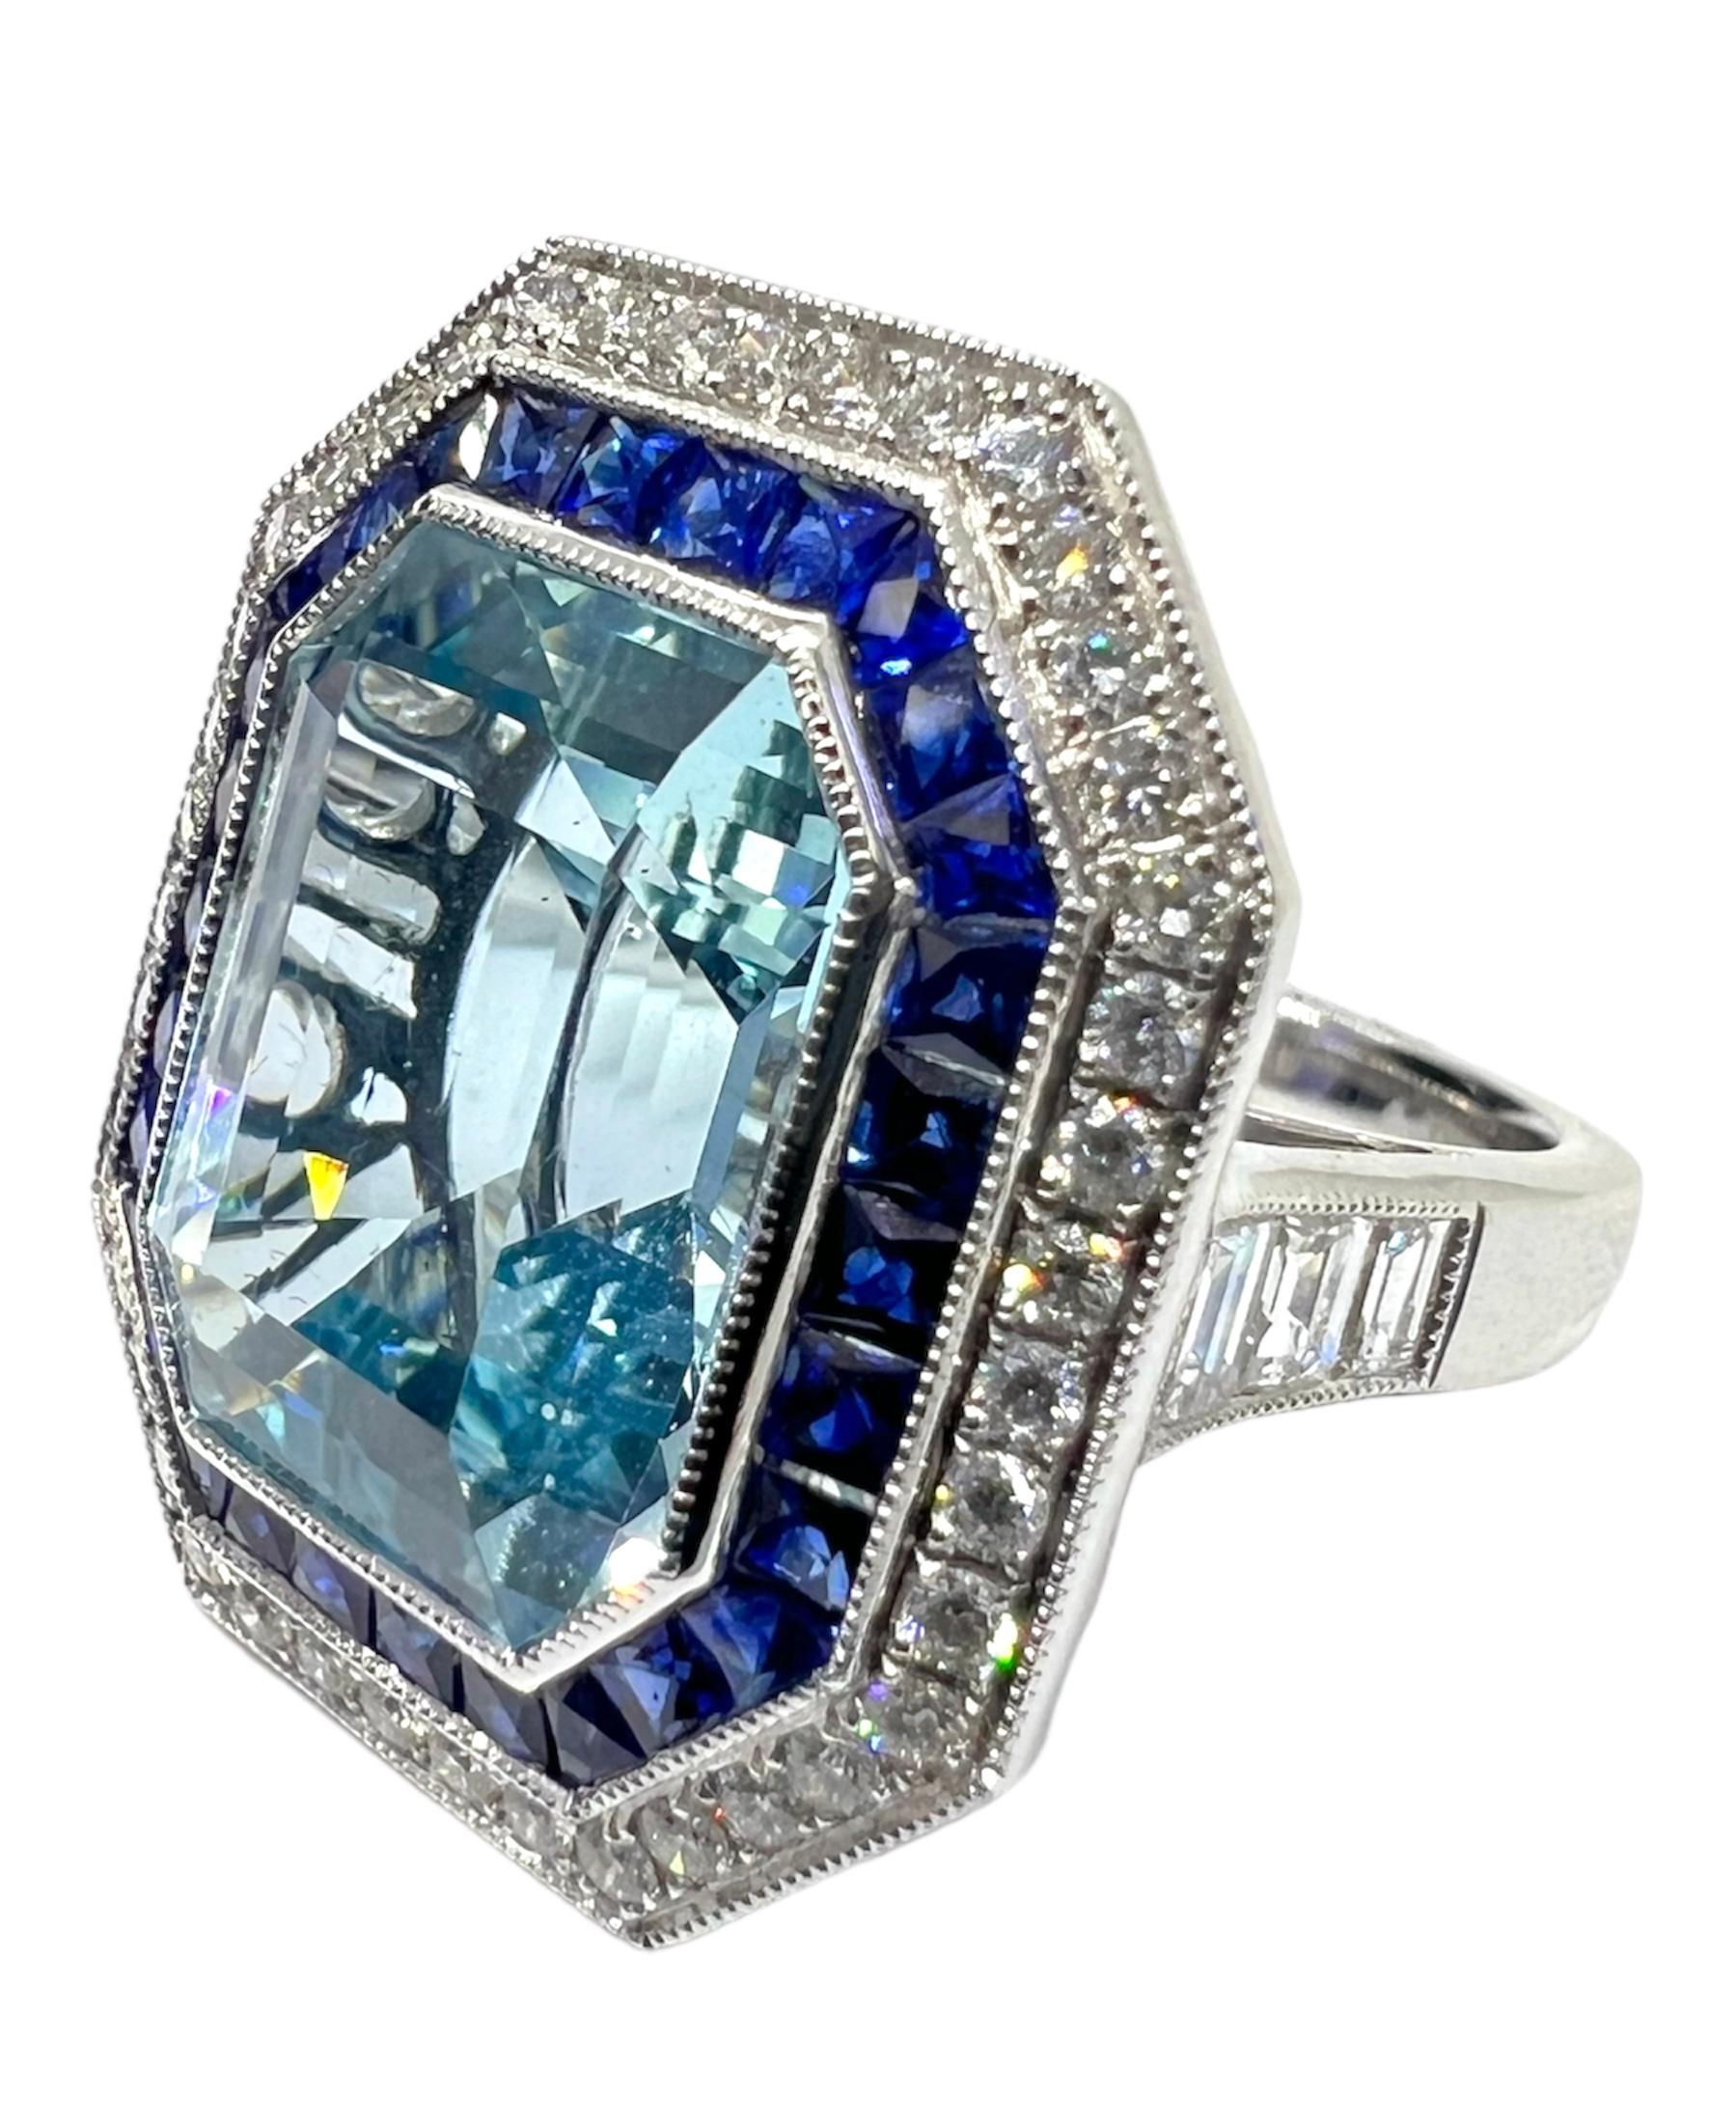 Platinum ring with 9.20 carat aquamarine, 1.20 carat diamond and 1.27 carat sapphire.

Sophia D by Joseph Dardashti LTD has been known worldwide for 35 years and are inspired by classic Art Deco design that merges with modern manufacturing